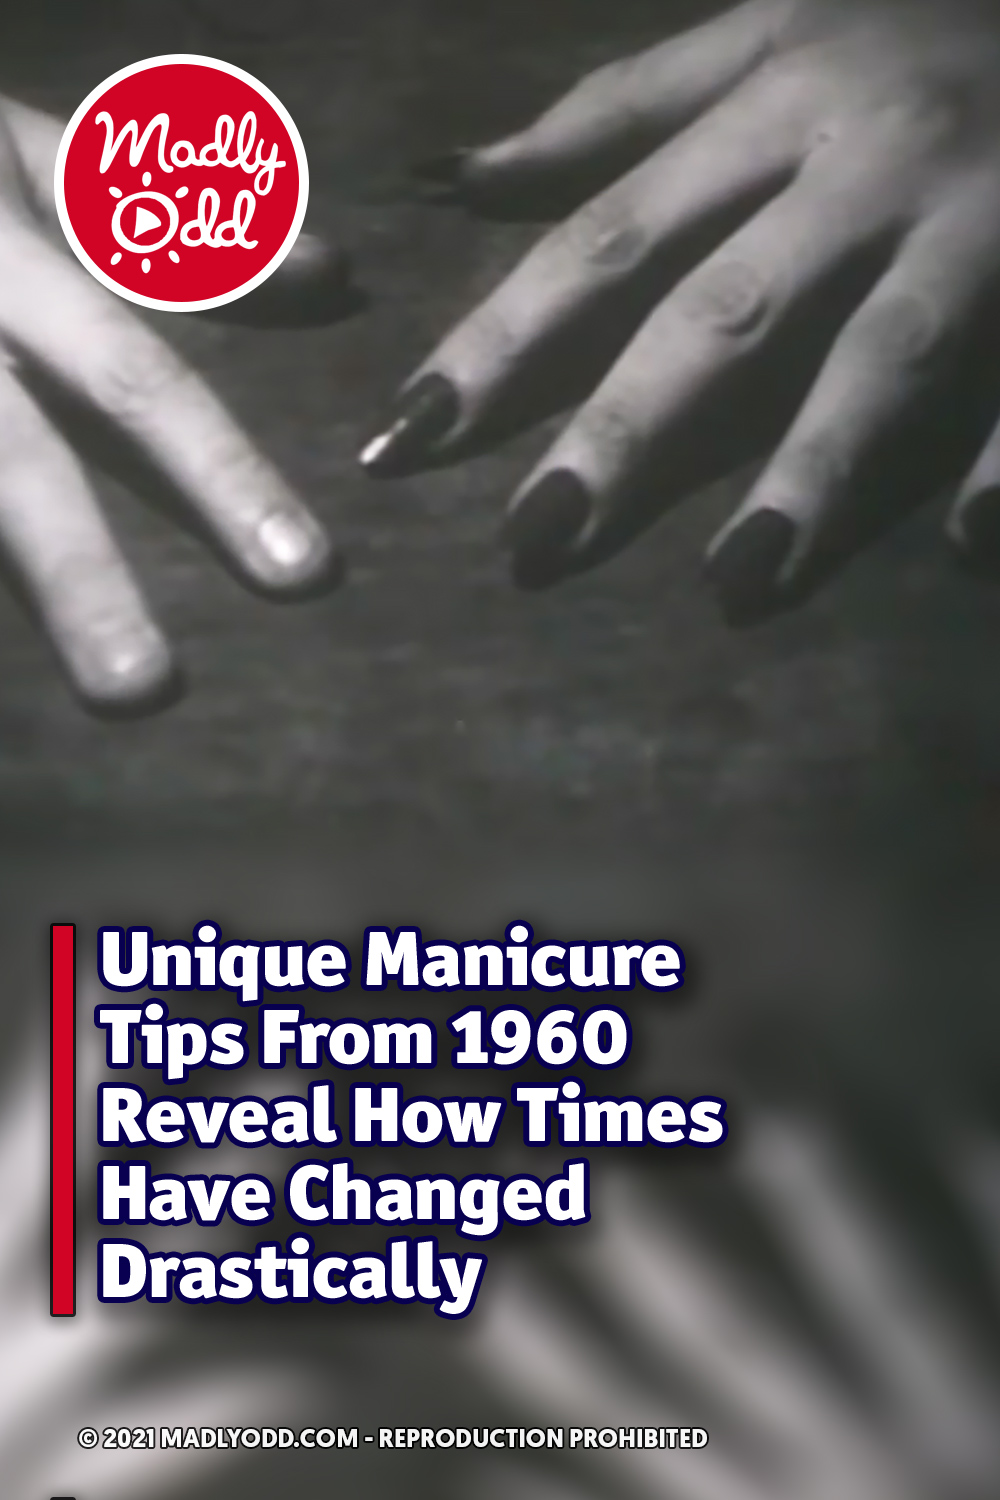 Unique Manicure Tips From 1960 Reveal How Times Have Changed Drastically